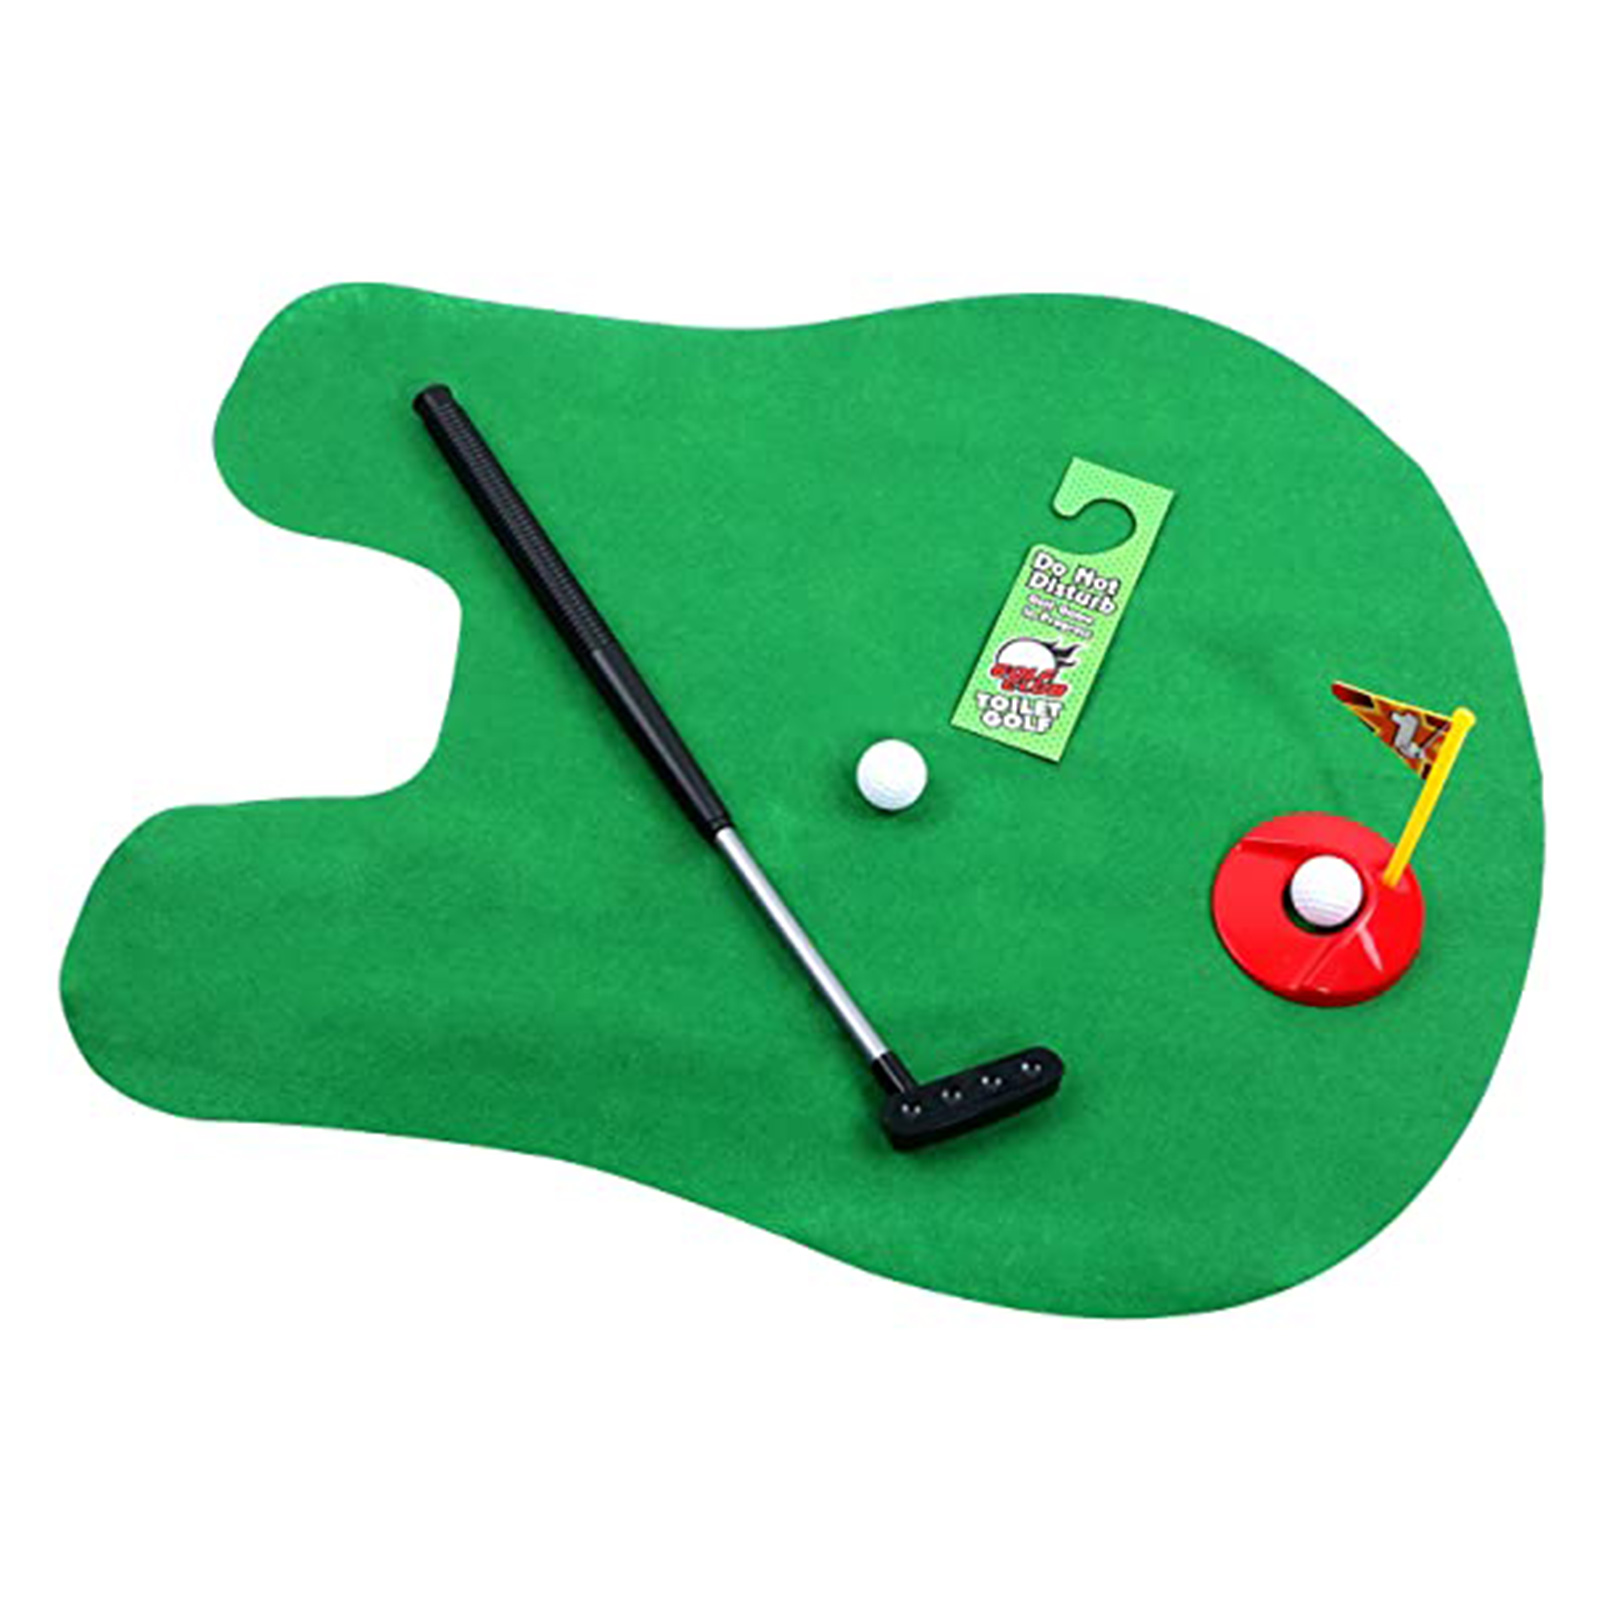 lzndeal Toilet Golf Ball Toy Set Anti-Slip Lawn Mat with Simulative Golf Set Child - image 1 of 6